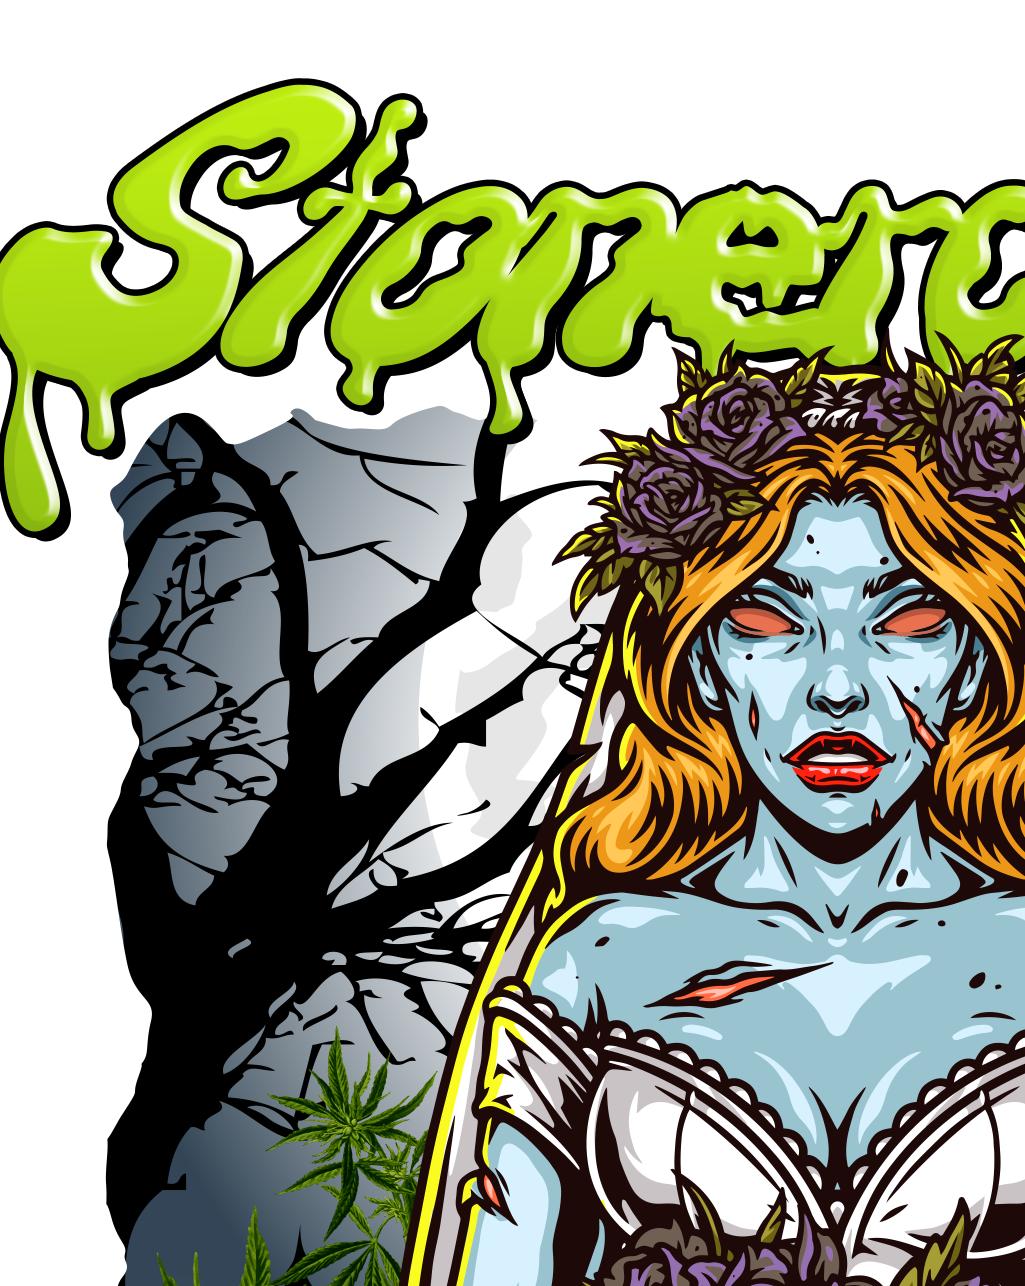 StonerDays Bride Of The Living Nugs Tee featuring zombie bride graphic on white cotton